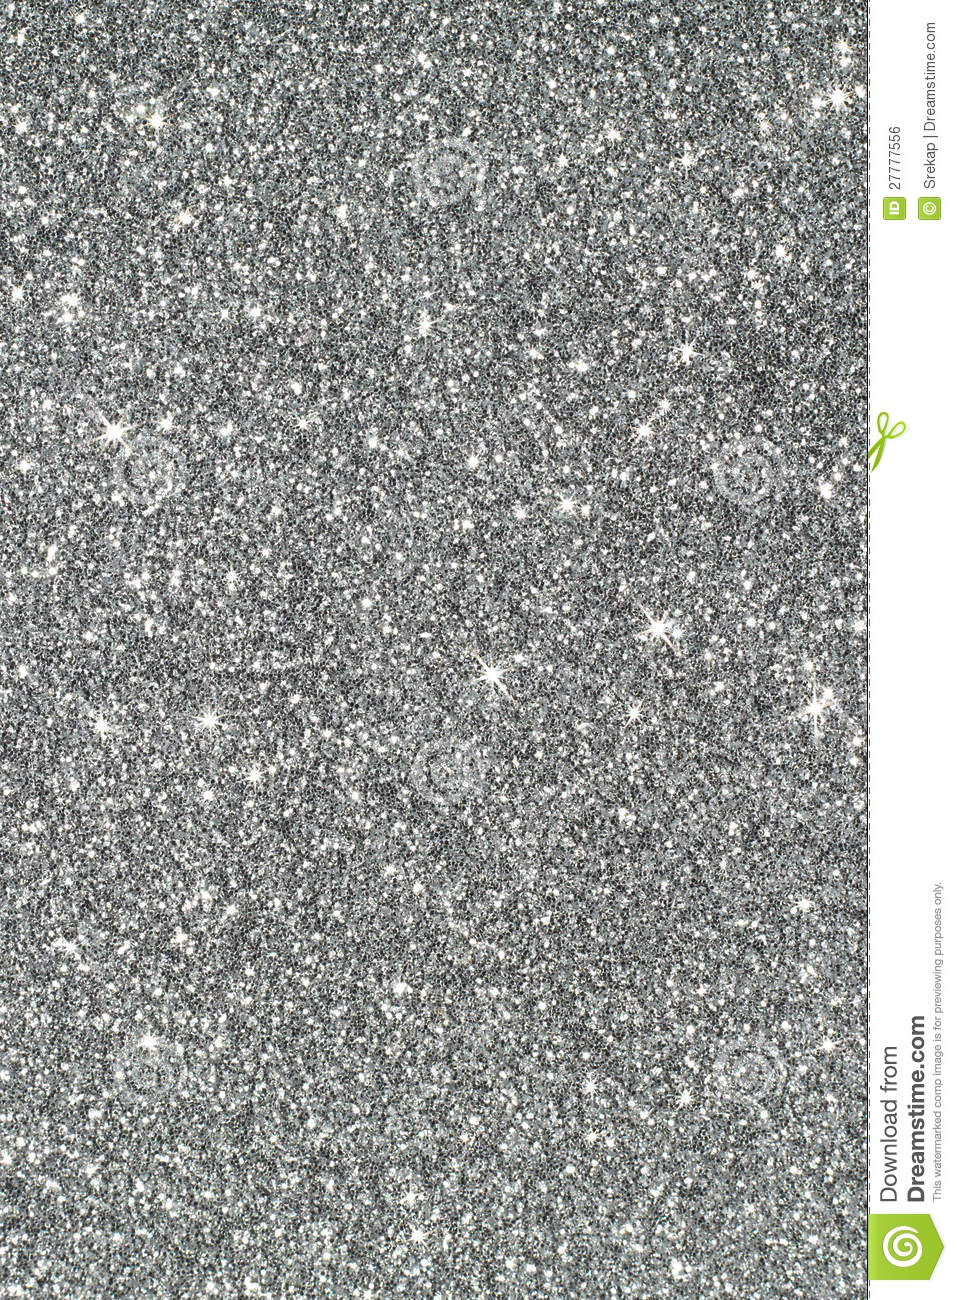 Silver Glitter Background Royalty Stock Image